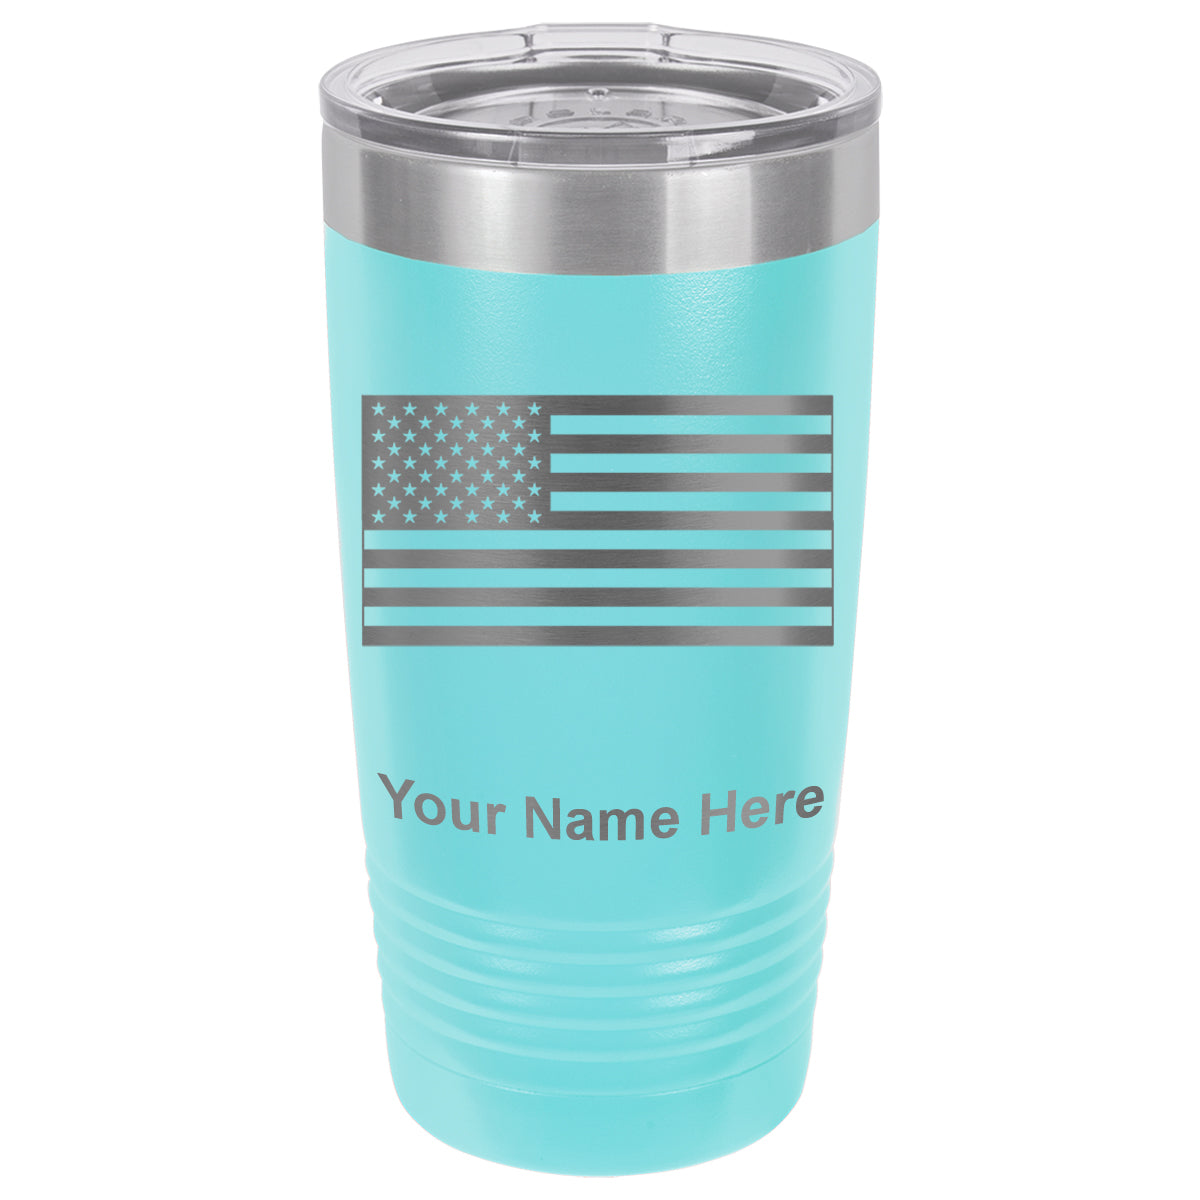 20oz Vacuum Insulated Tumbler Mug, Flag of the United States, Personalized Engraving Included